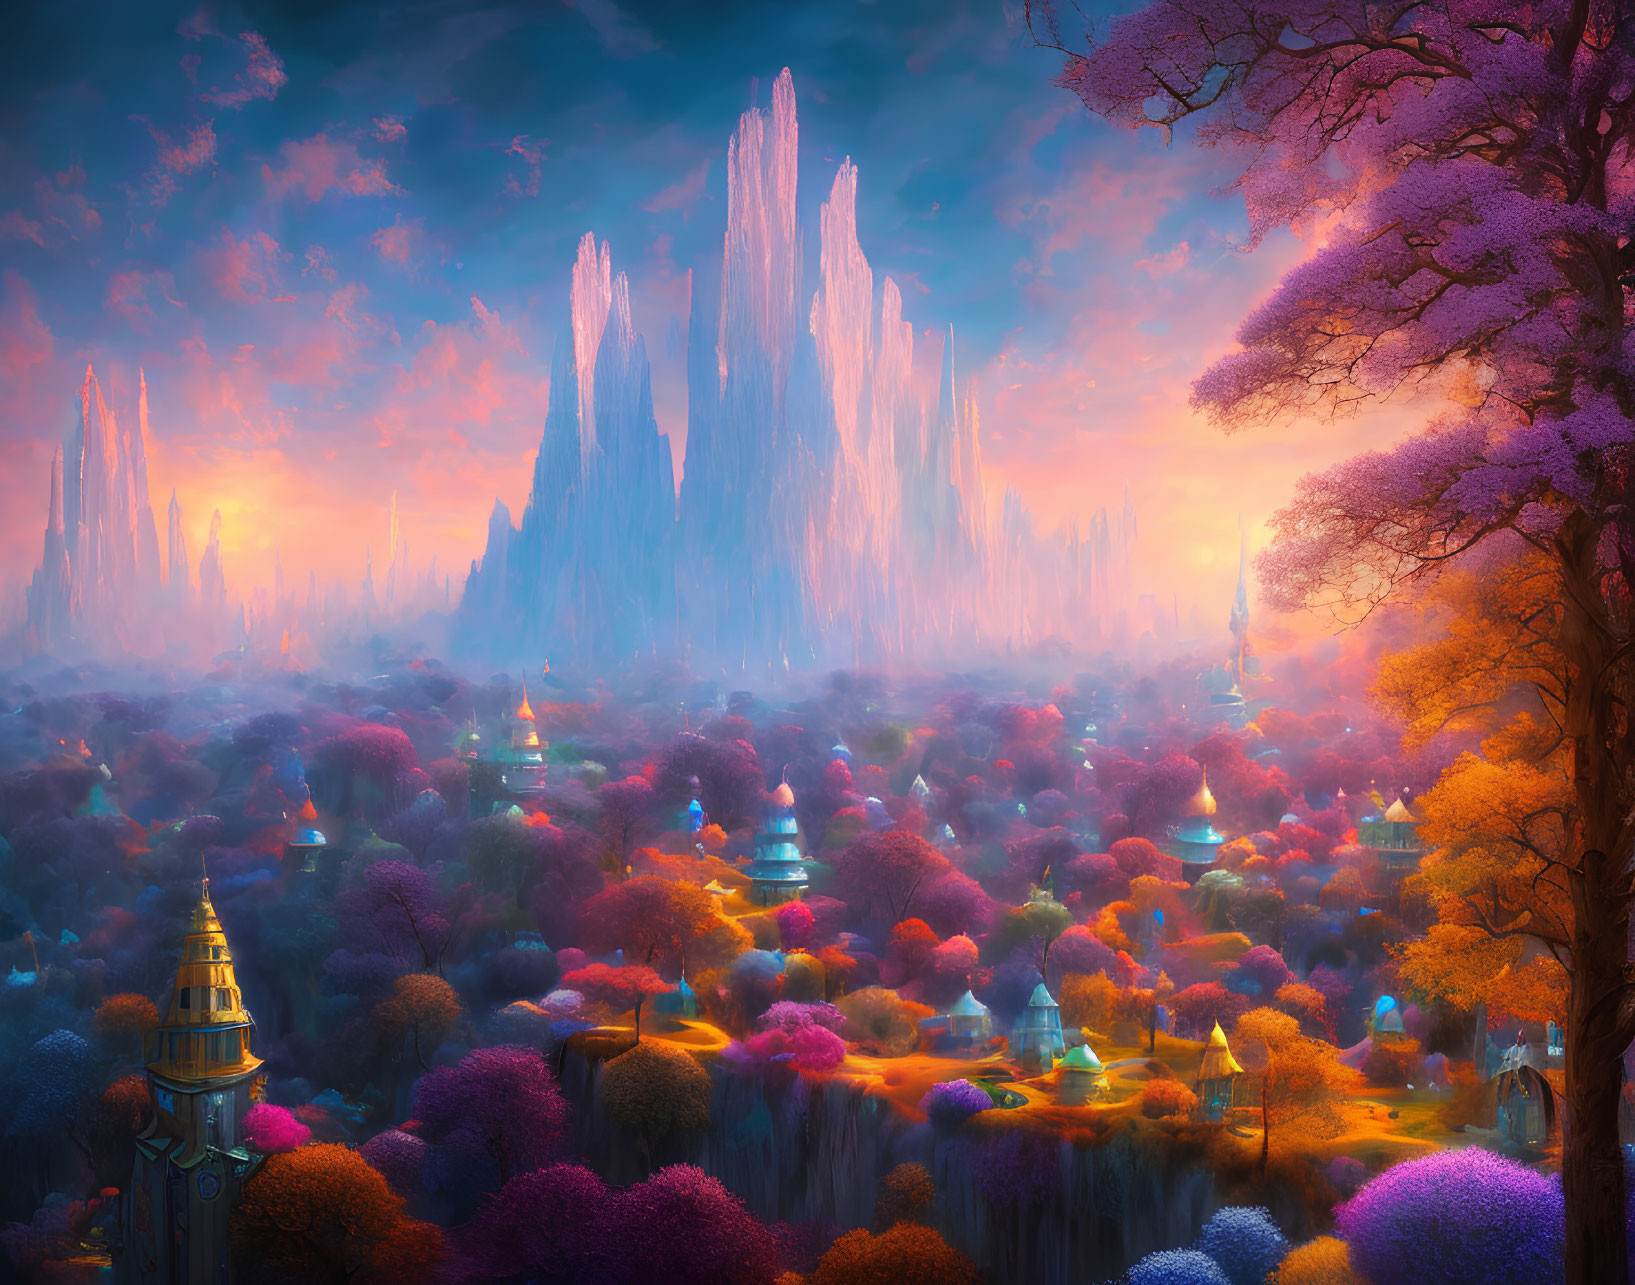 Vibrant sunset landscape with colorful trees and crystal spires